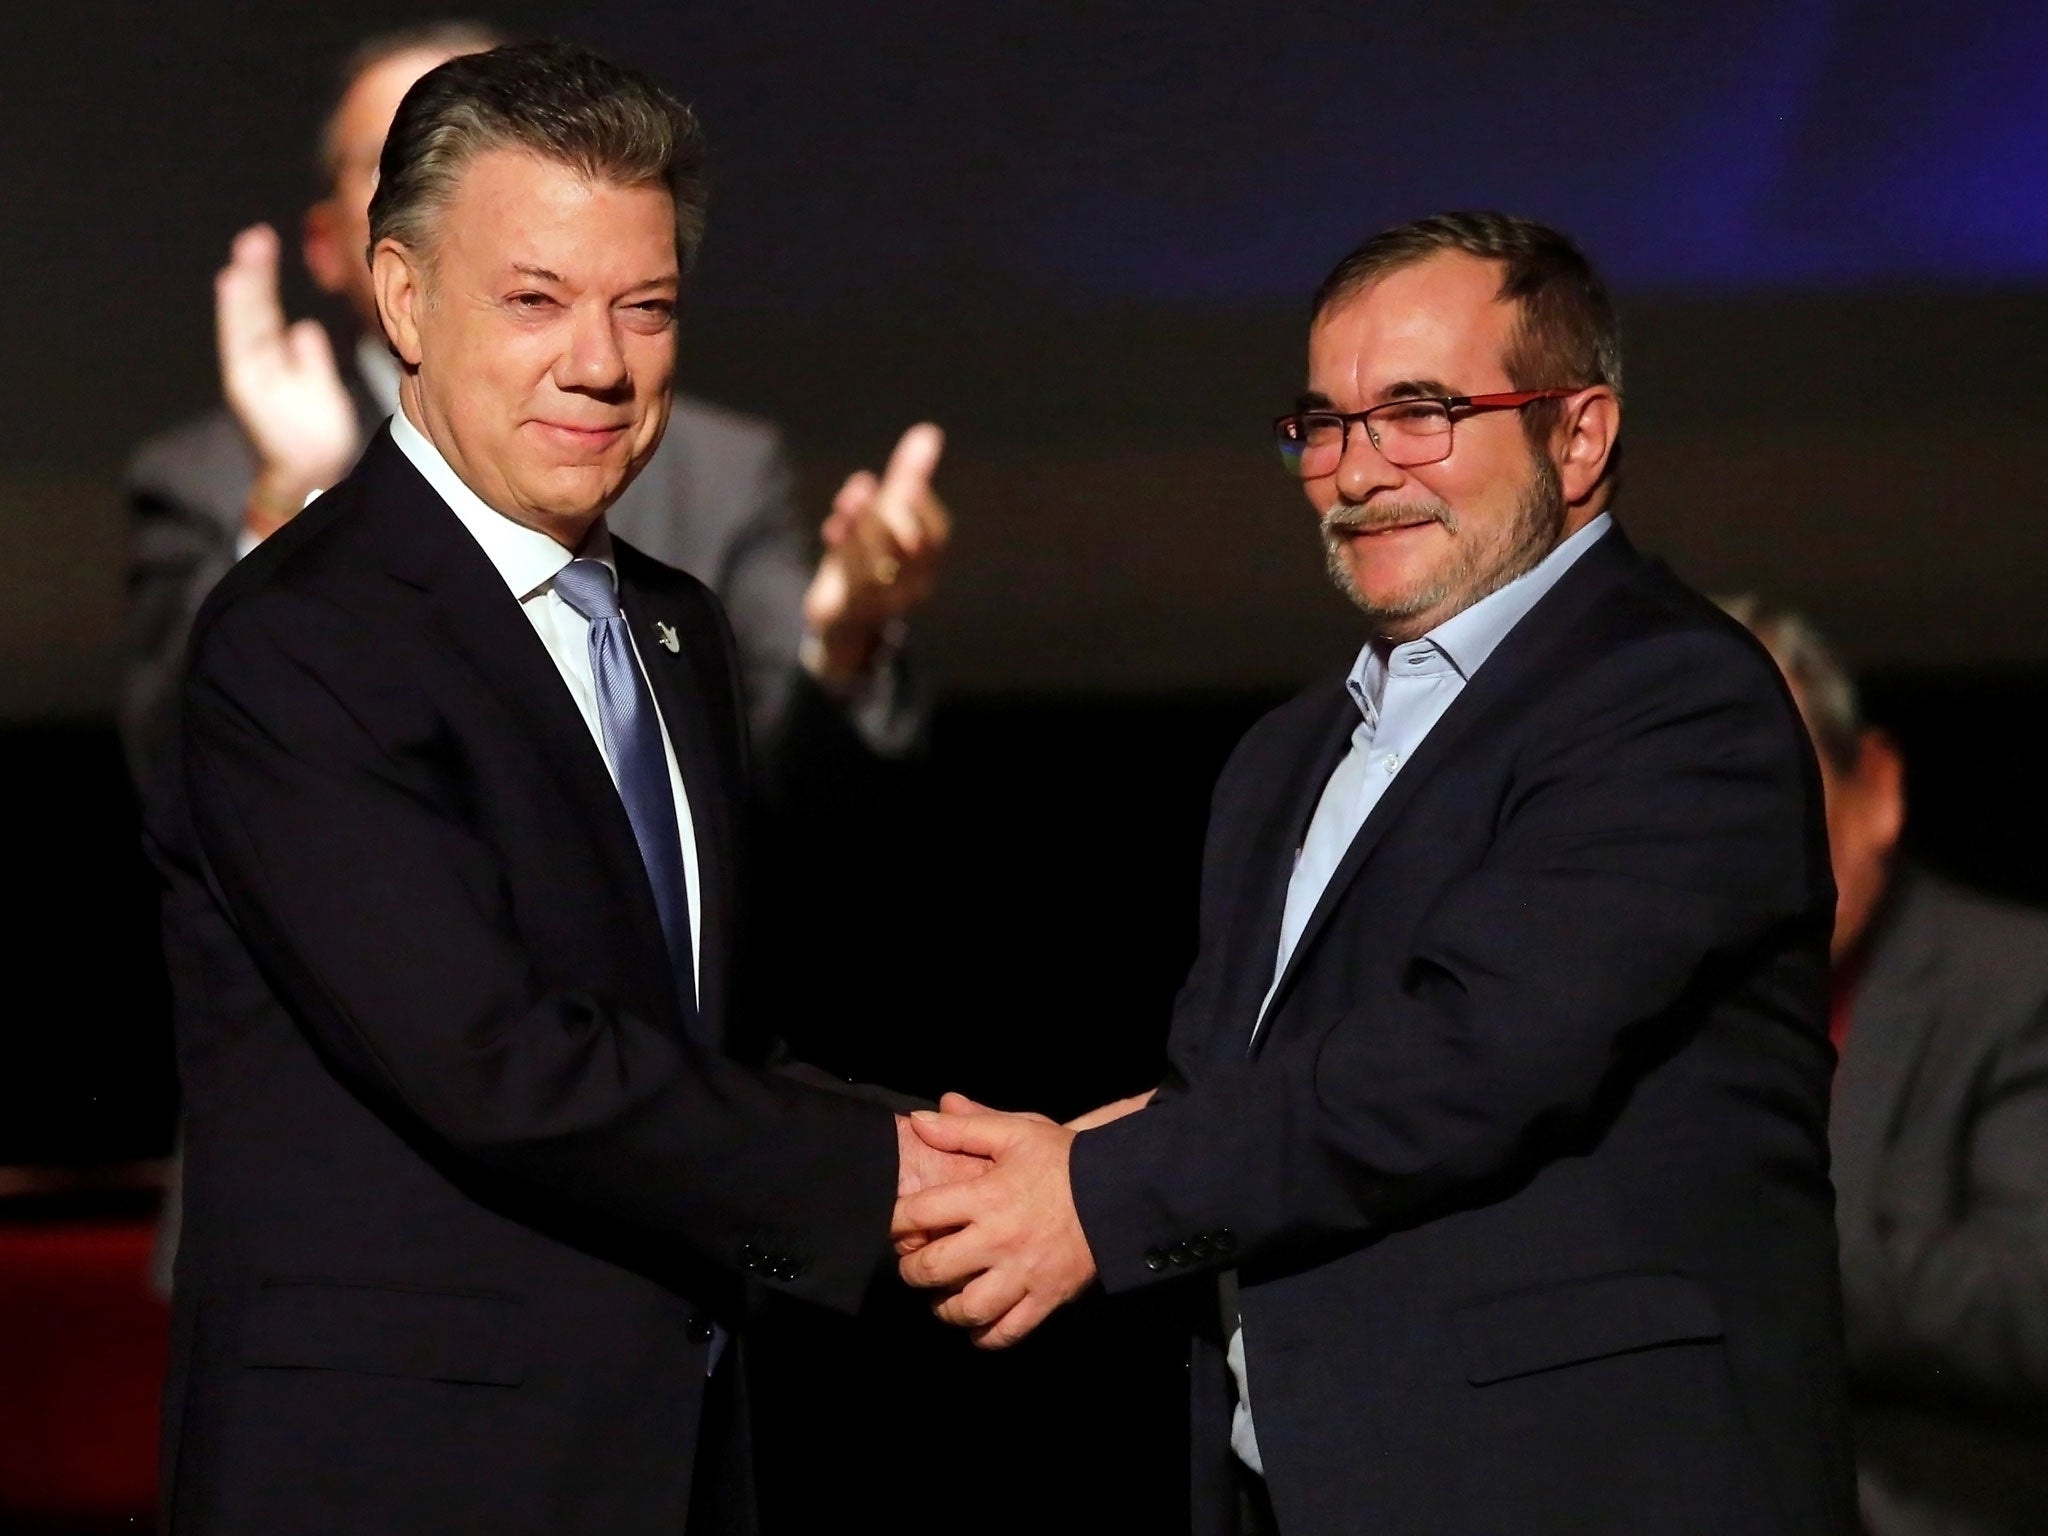 Colombia's President Juan Manuel Santos and Farc rebel leader Rodrigo Londono shake hands after signing the peace accord